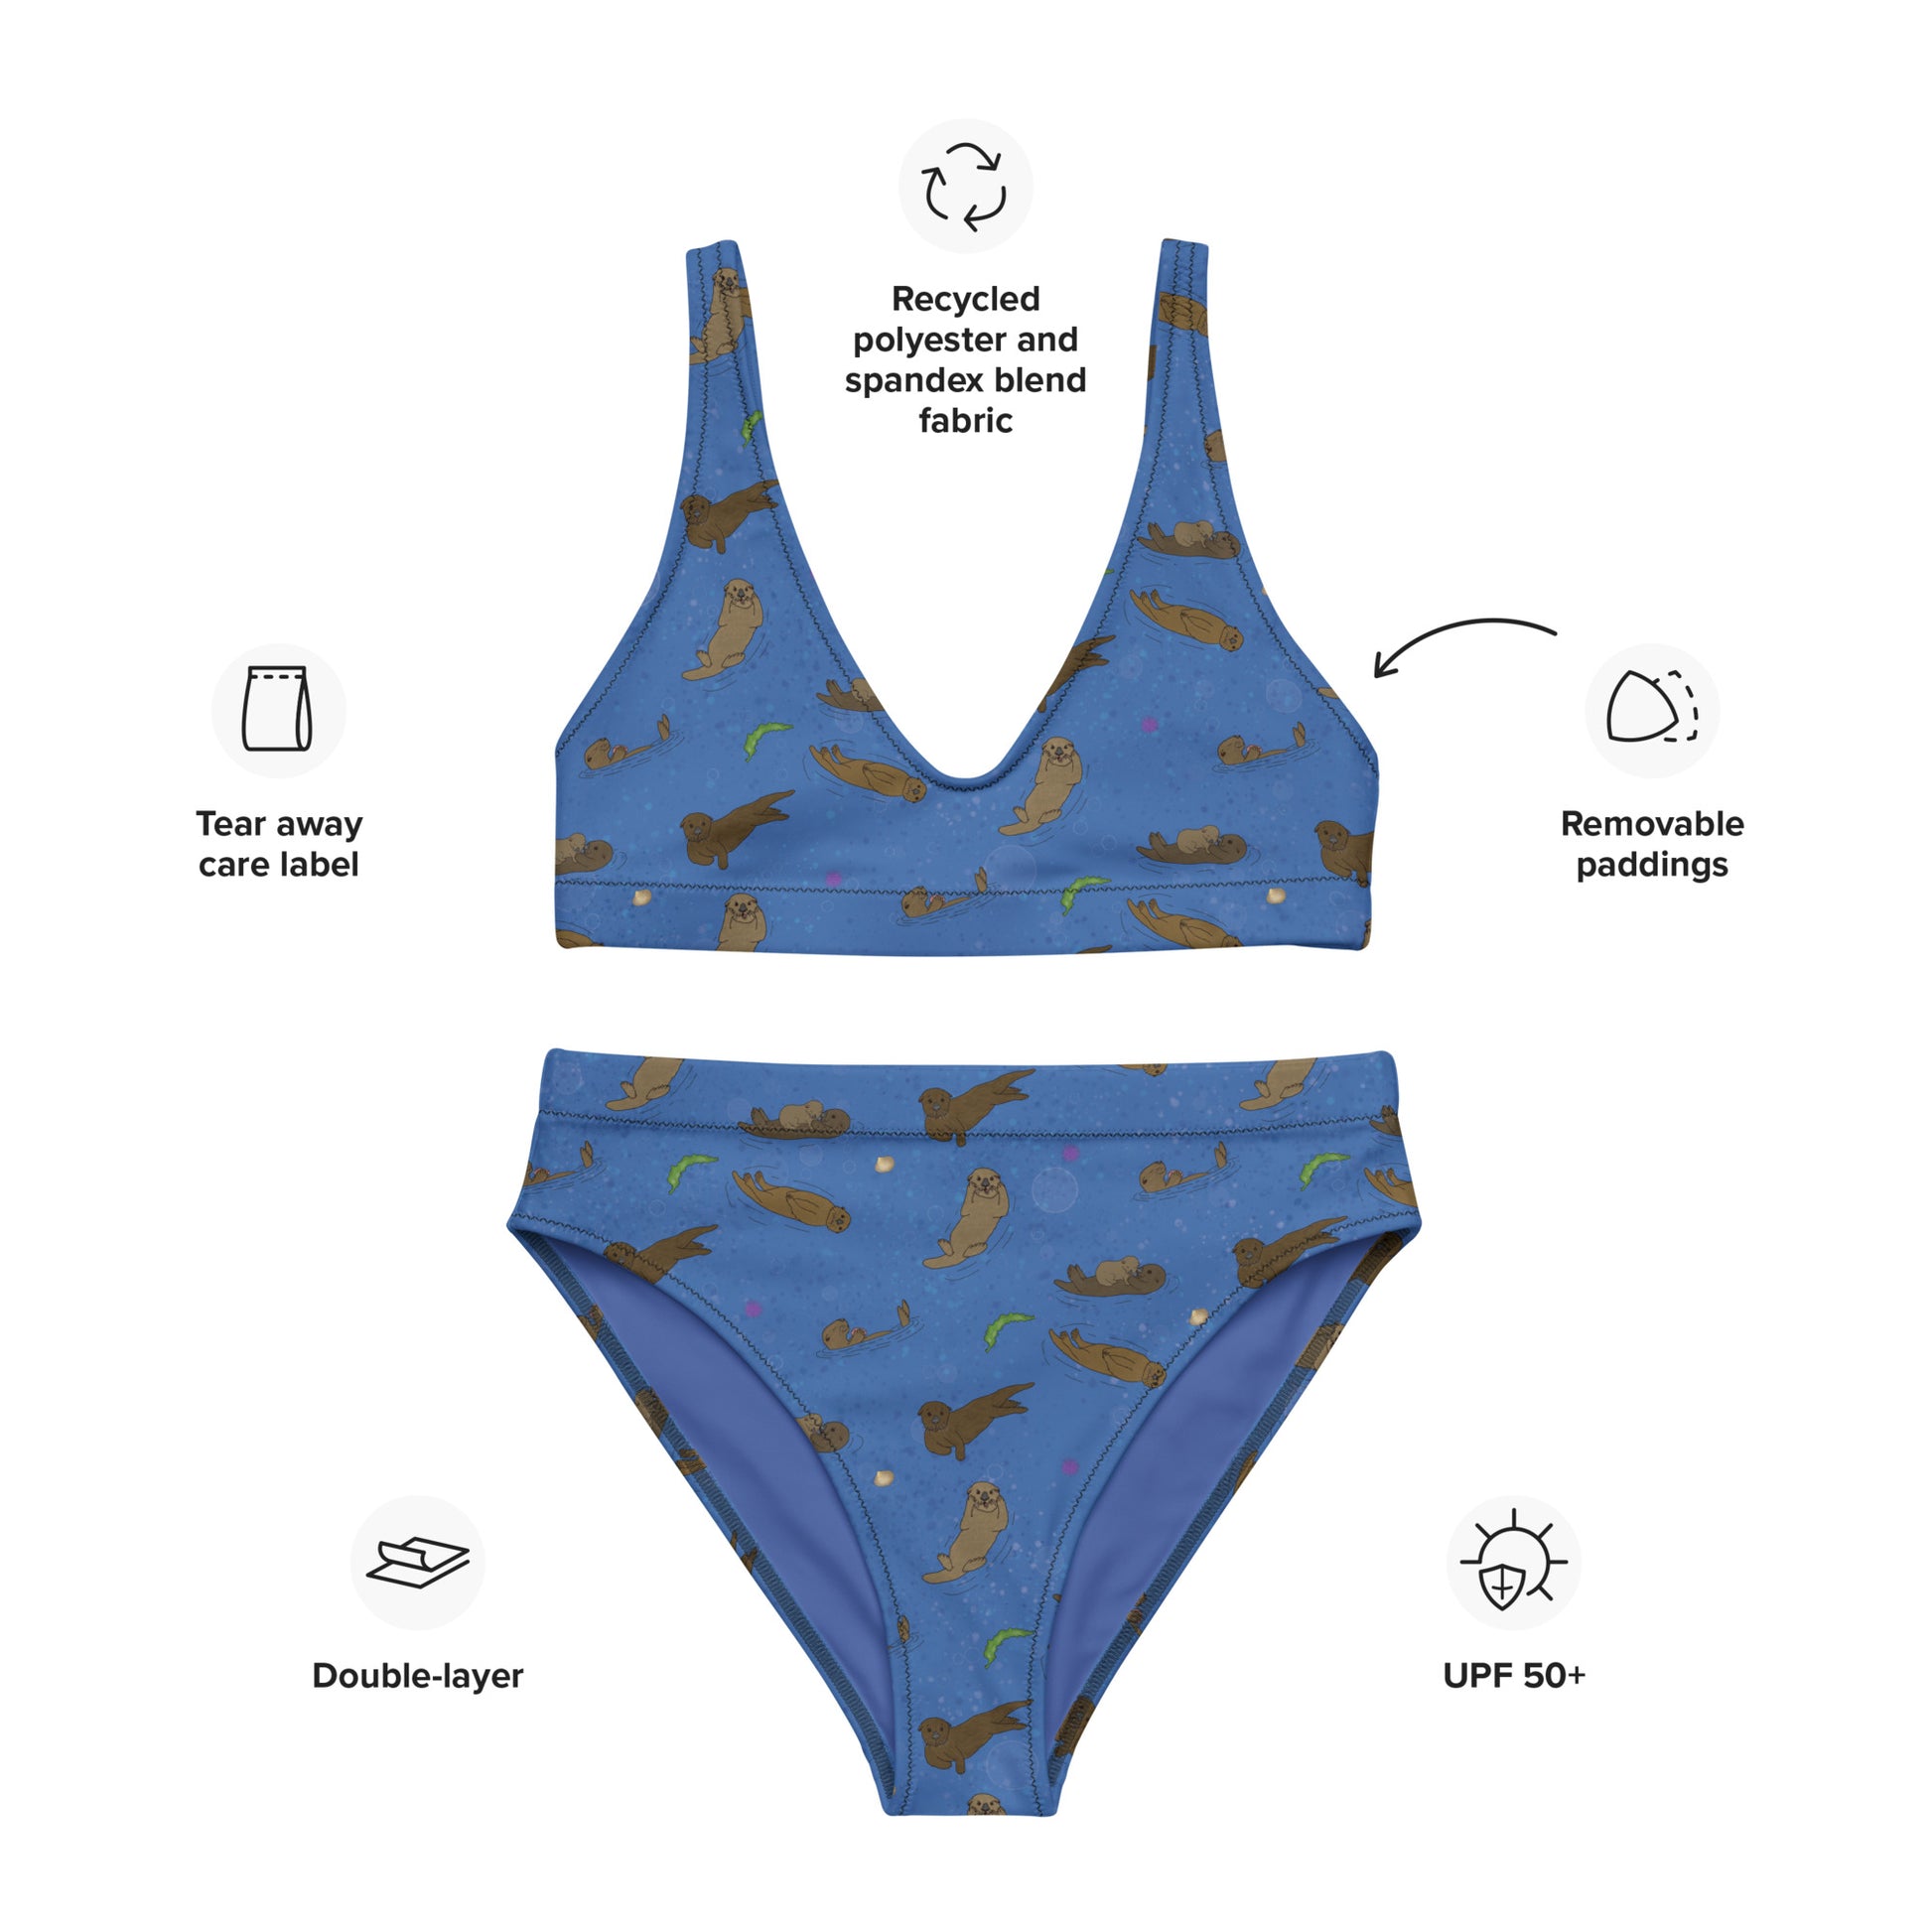 High-waisted bikini with hand-illustrated sea otters patterned on an ocean blue background. Made from recycled polyester combined with stretchable fabric. Has double layers and removable pads.